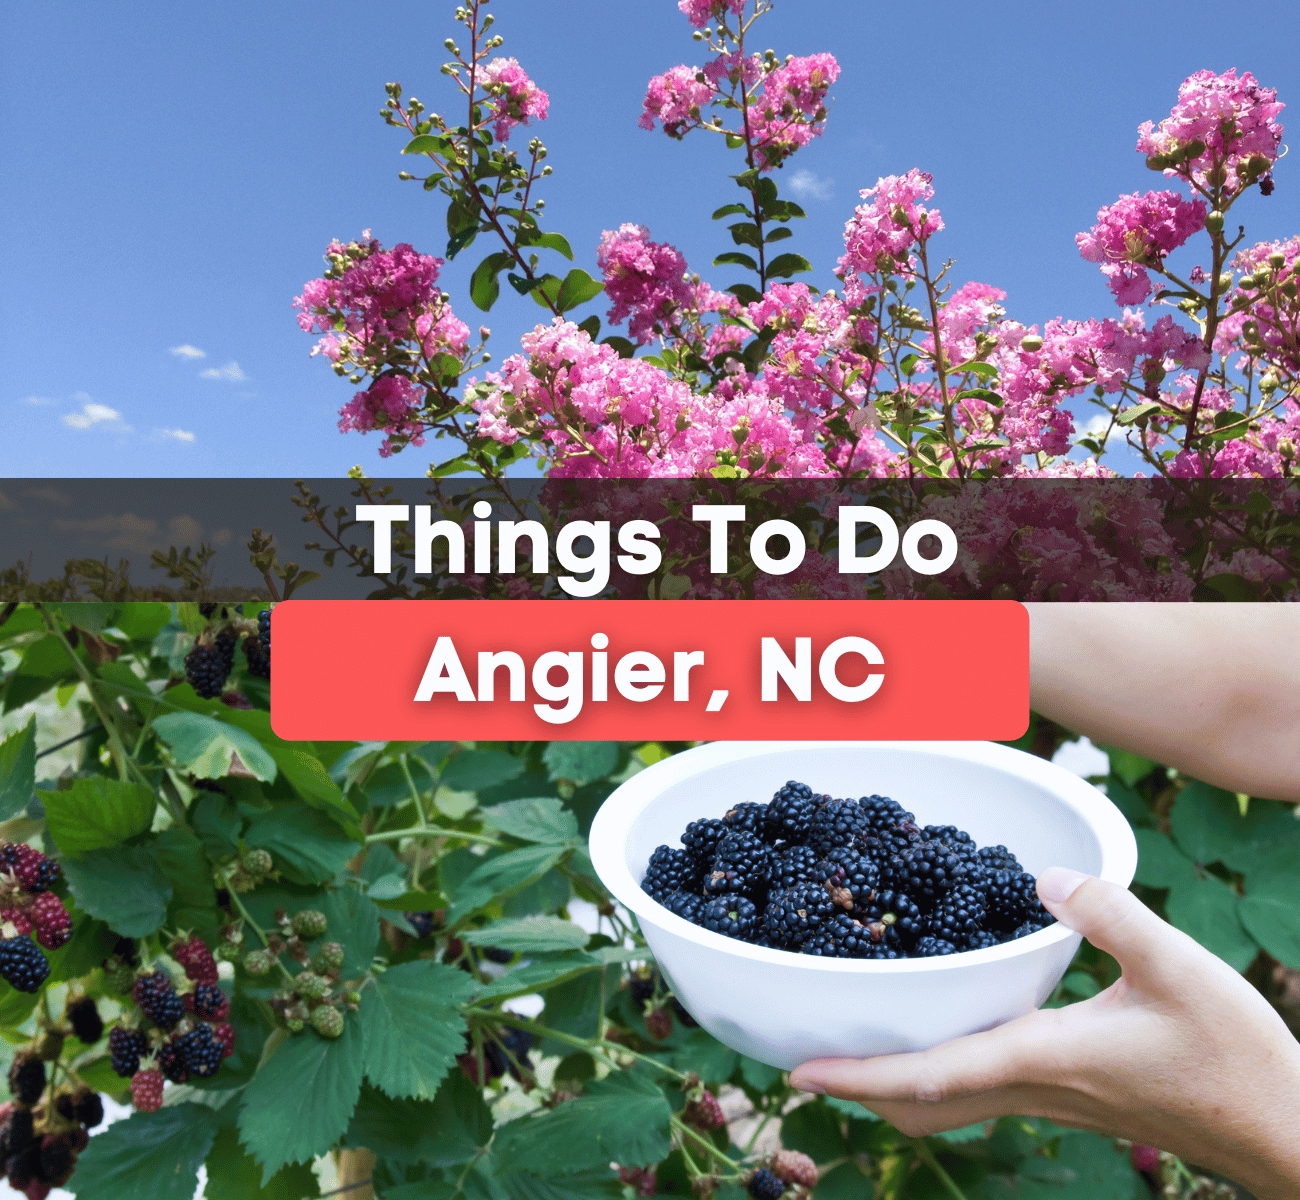 17 Fun Things To Do In Angier, NC